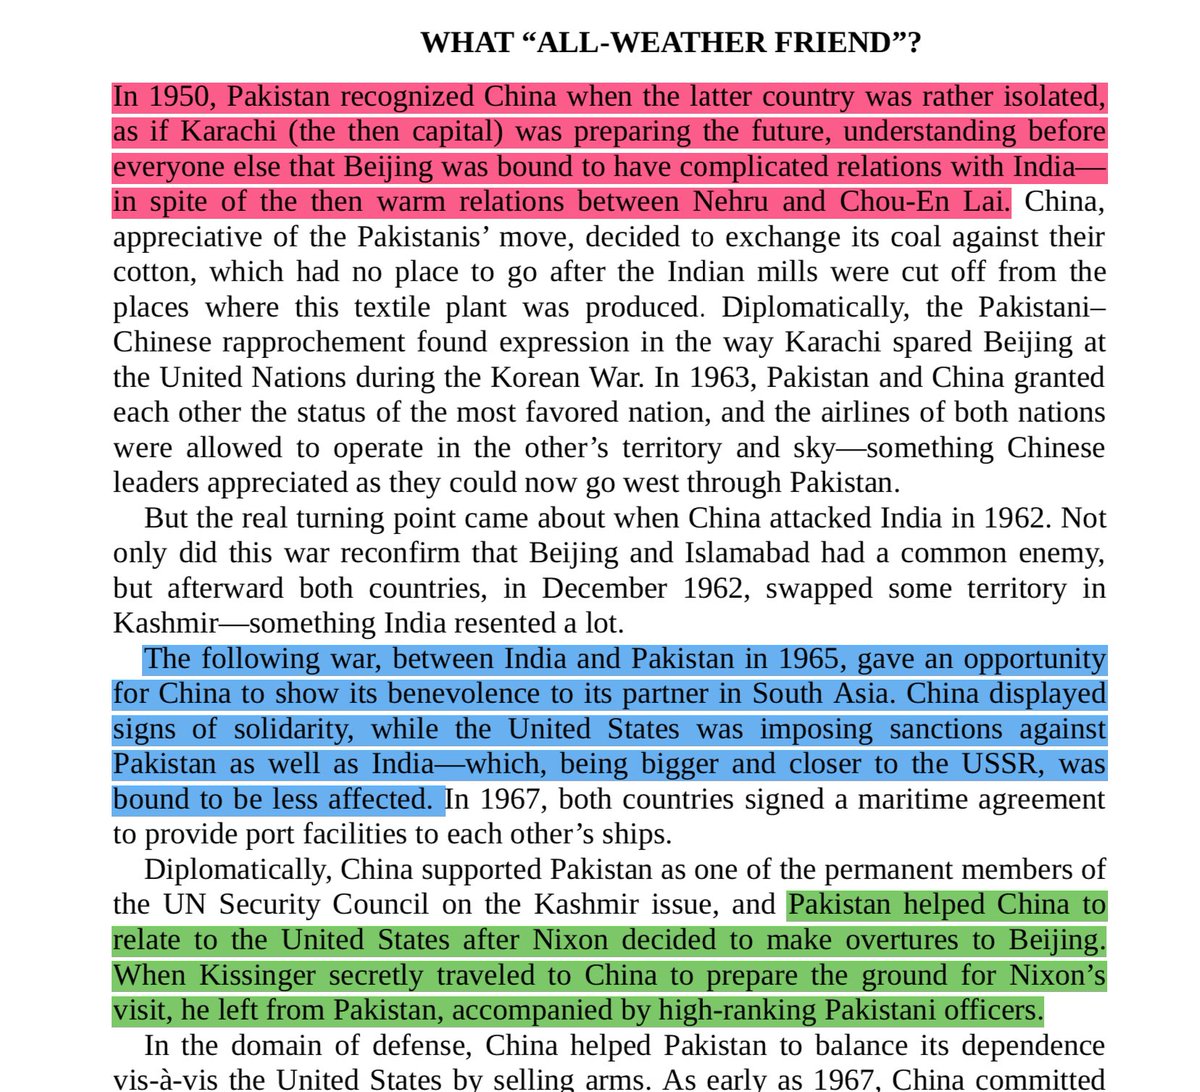 Pakistan helped China to relate to the United States after Nixon decided to make overtures to Beijing. When Kissinger secretly traveled to China to prepare the ground for Nixon’s visit, he left from Pakistan, accompanied by high-ranking Pakistani officers.